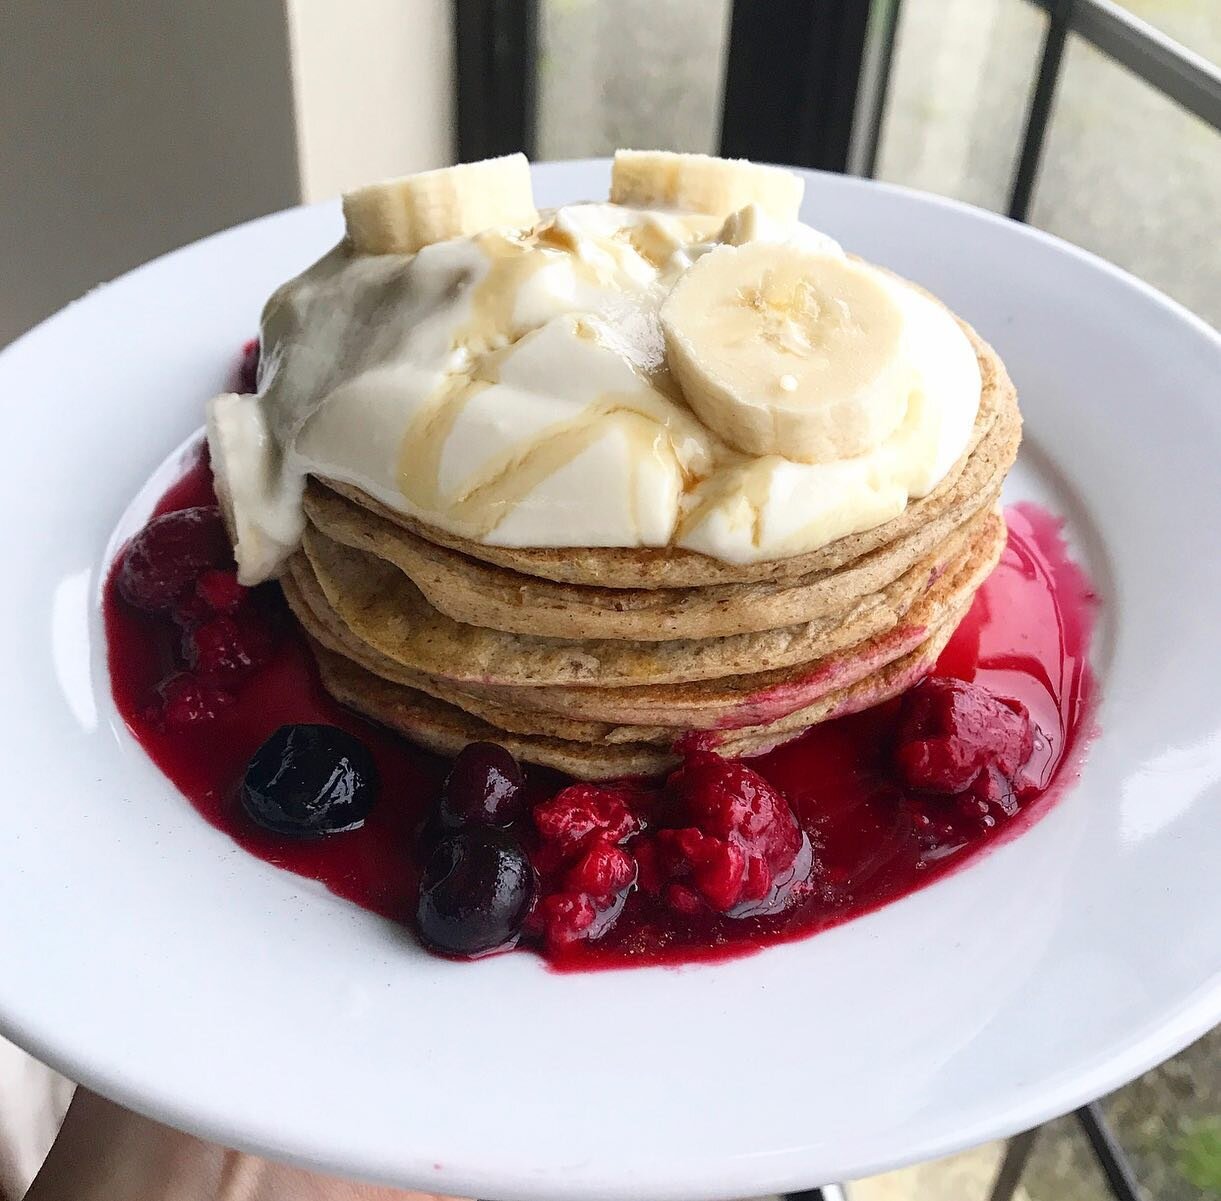 Don&rsquo;t ask me why I wait all year to eat pancakes as they&rsquo;re really a delicious breakfast/snack. You can make them as nutritious as you want them to be so on that note here are my two favourites using whole plant ingredients. Absolutely de